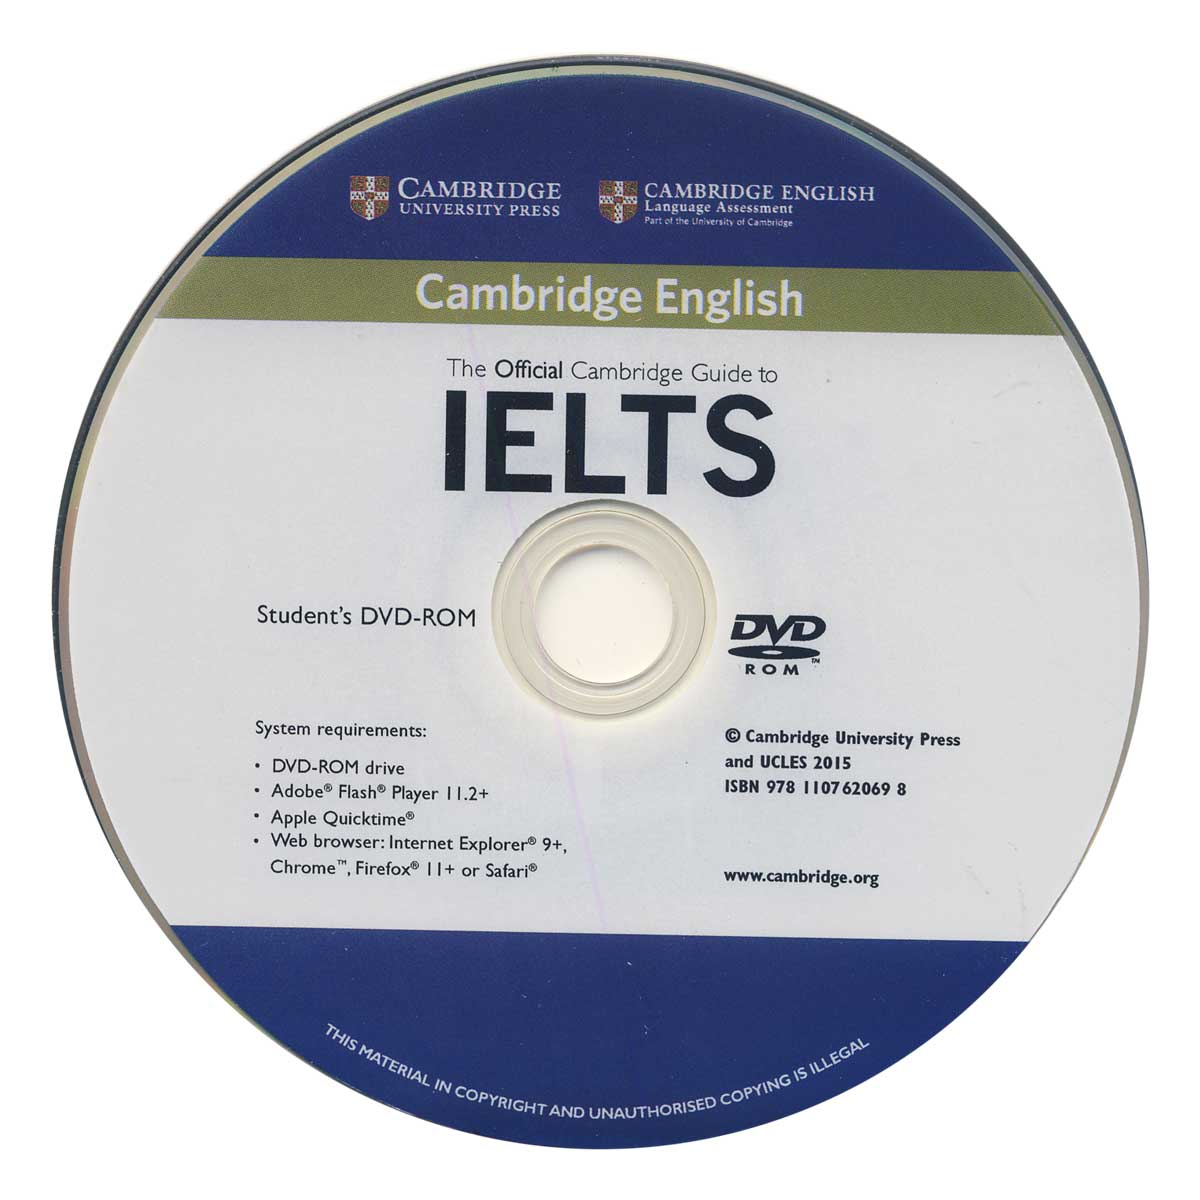 The official Cambridge Guide to IELTS